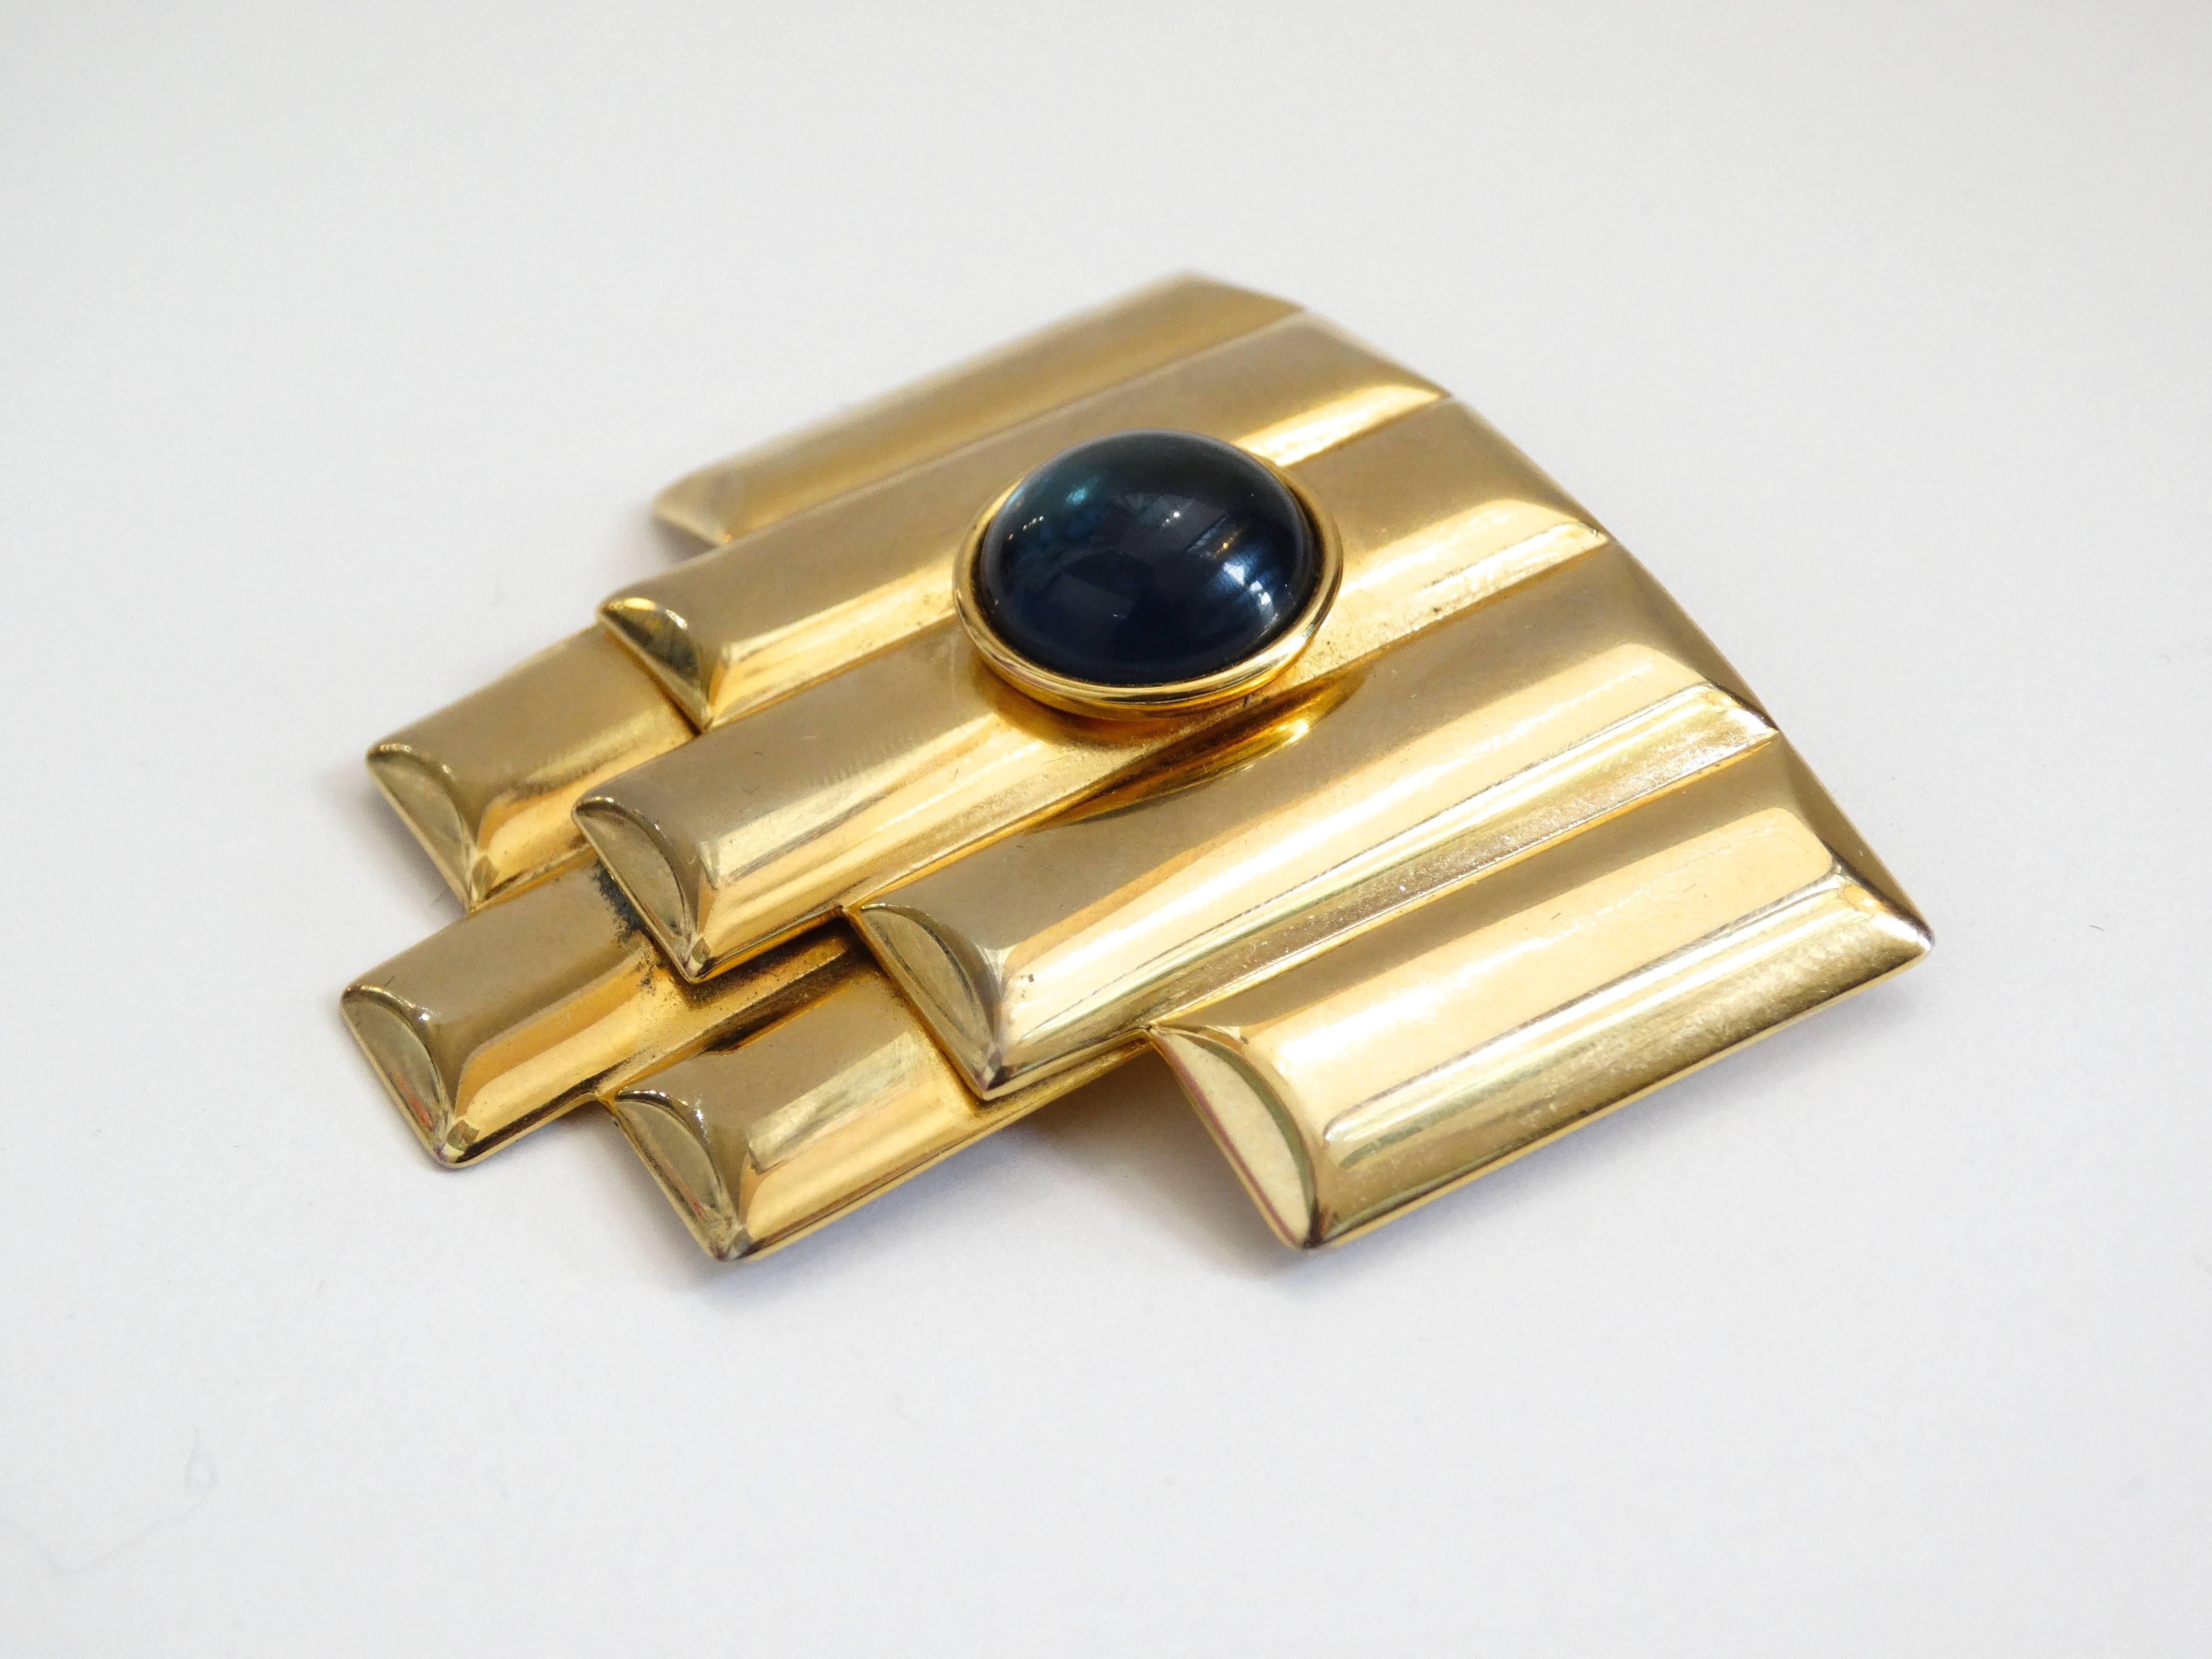 The perfect little gold brooch for all your evening looks from Balenciaga! This piece dates back to the 1980s, though it appears to be inspired by the art deco period of the 1920s. Gold toned metal in a layered, striped pattern, accented with a blue